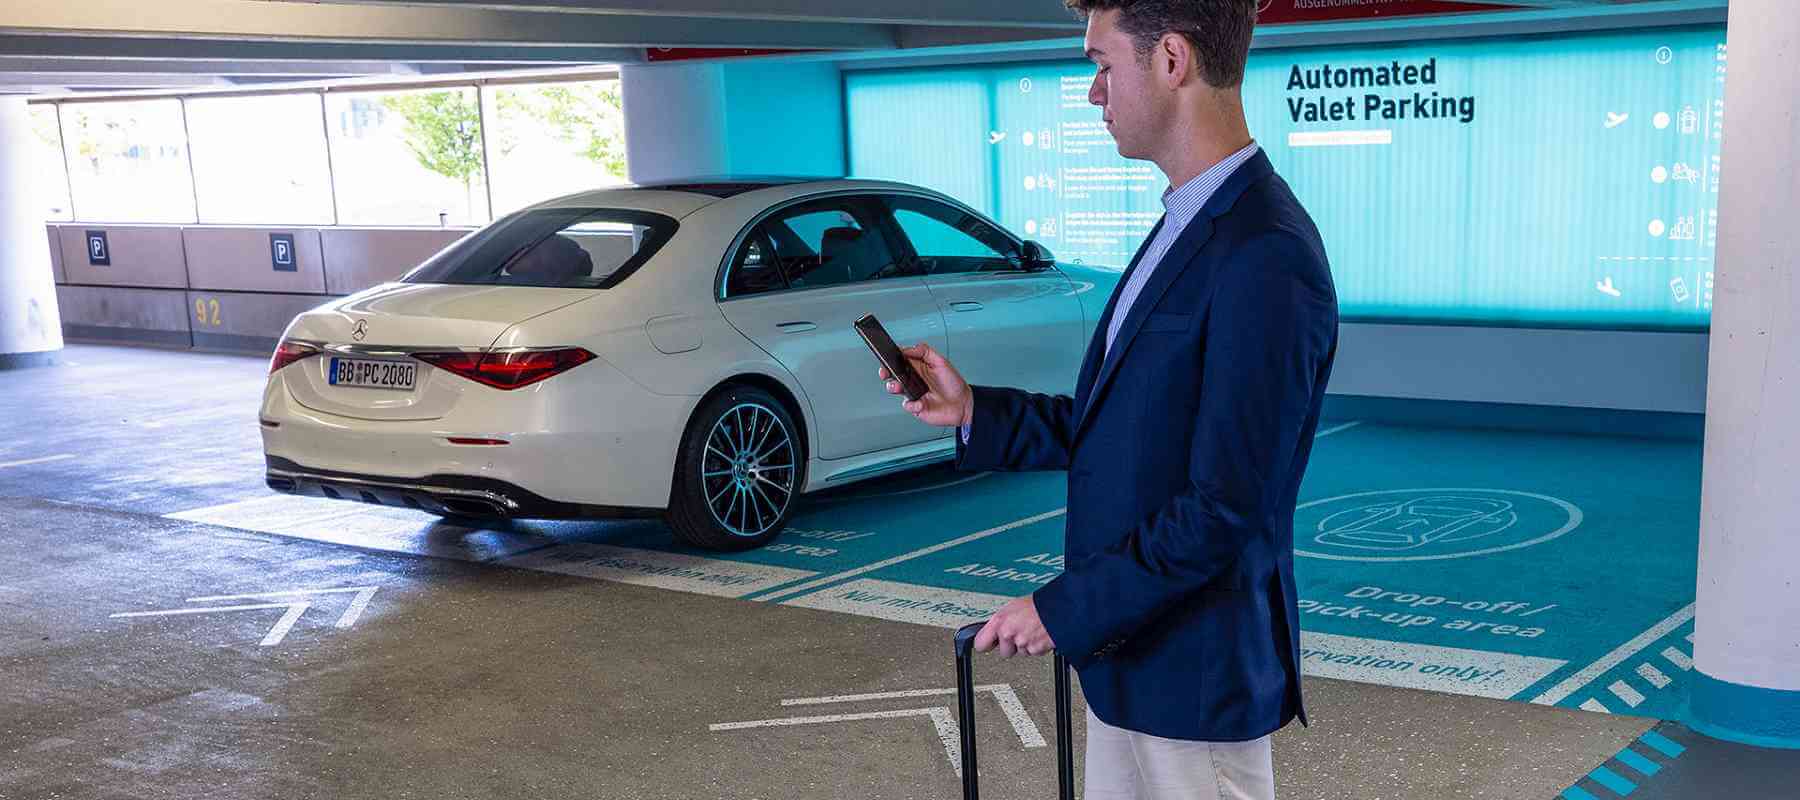 Mercedes and Bosch Want to Park Your Car For You